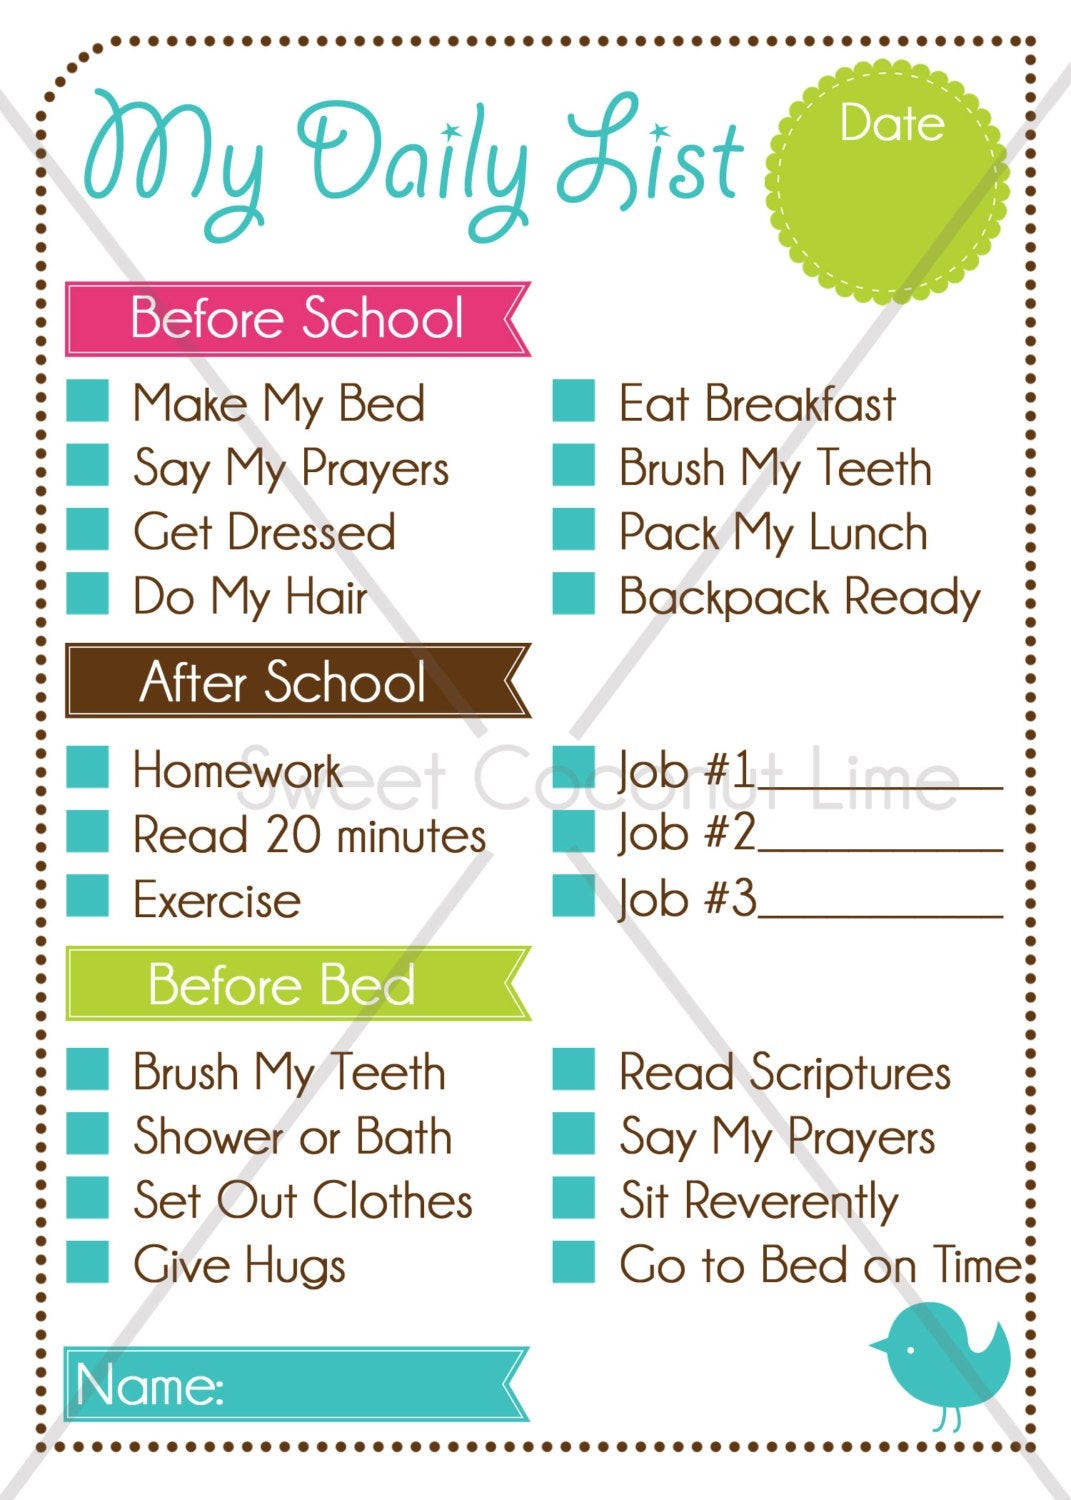 daily-checklist-template-for-kids-never-underestimate-the-influence-of